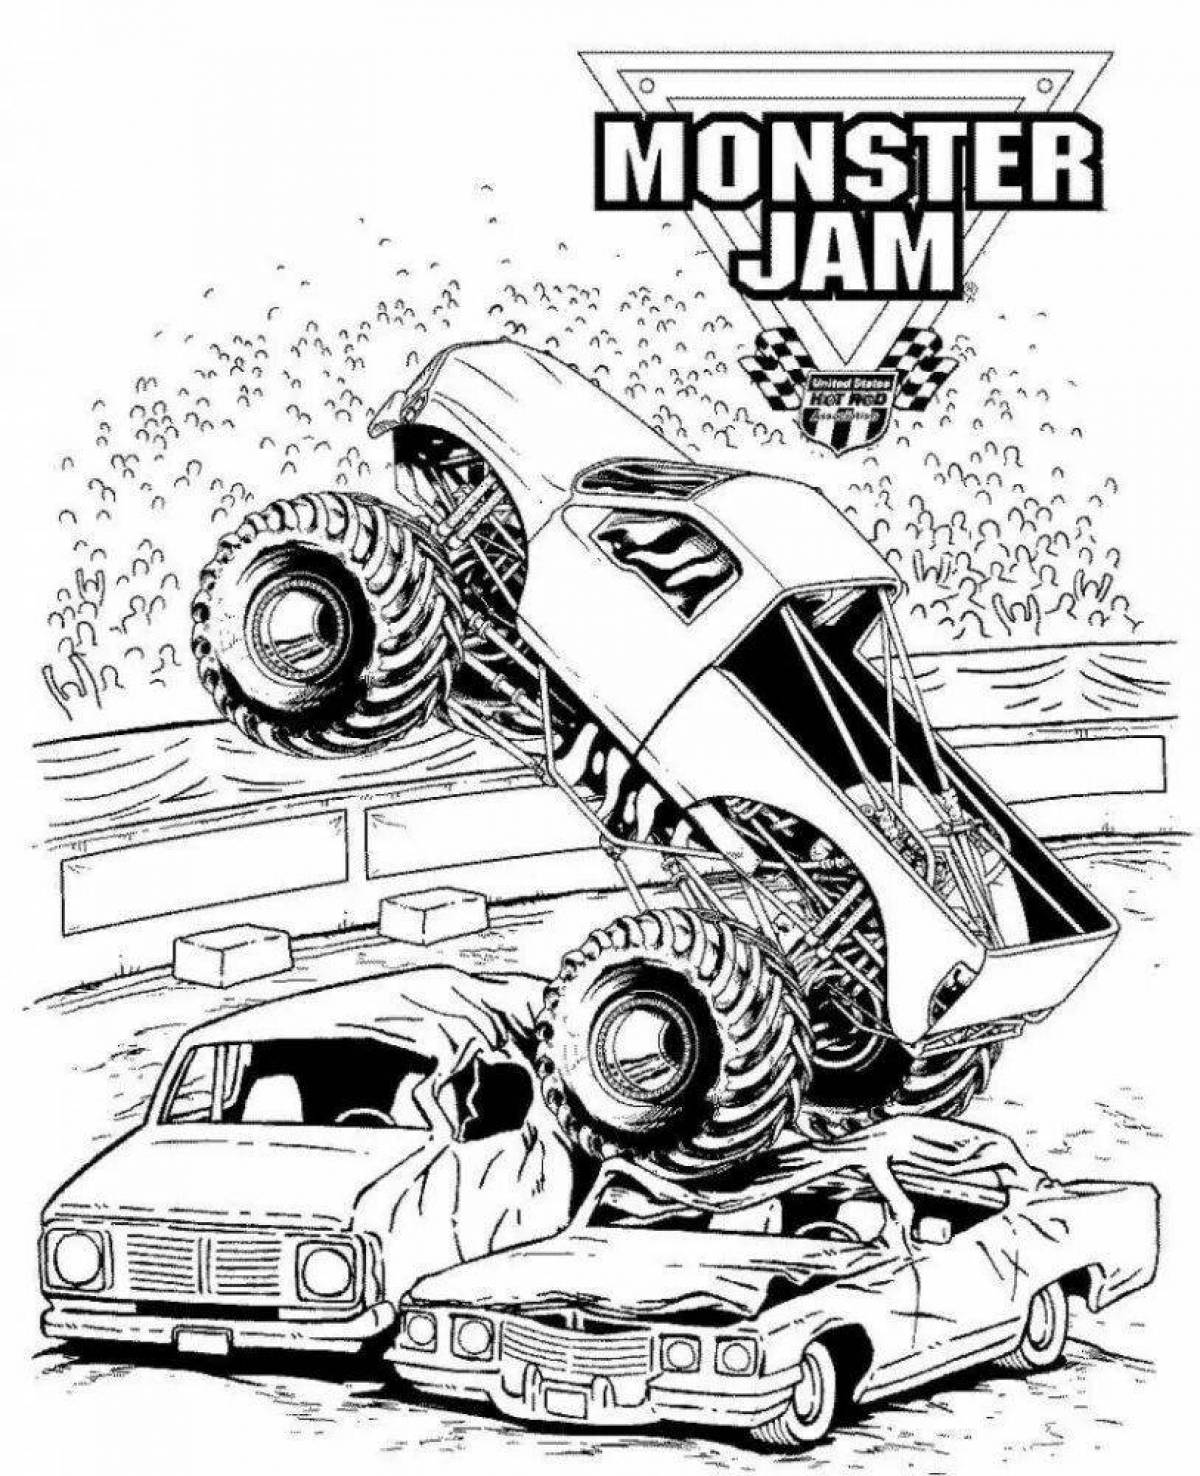 Exciting monster jam coloring book